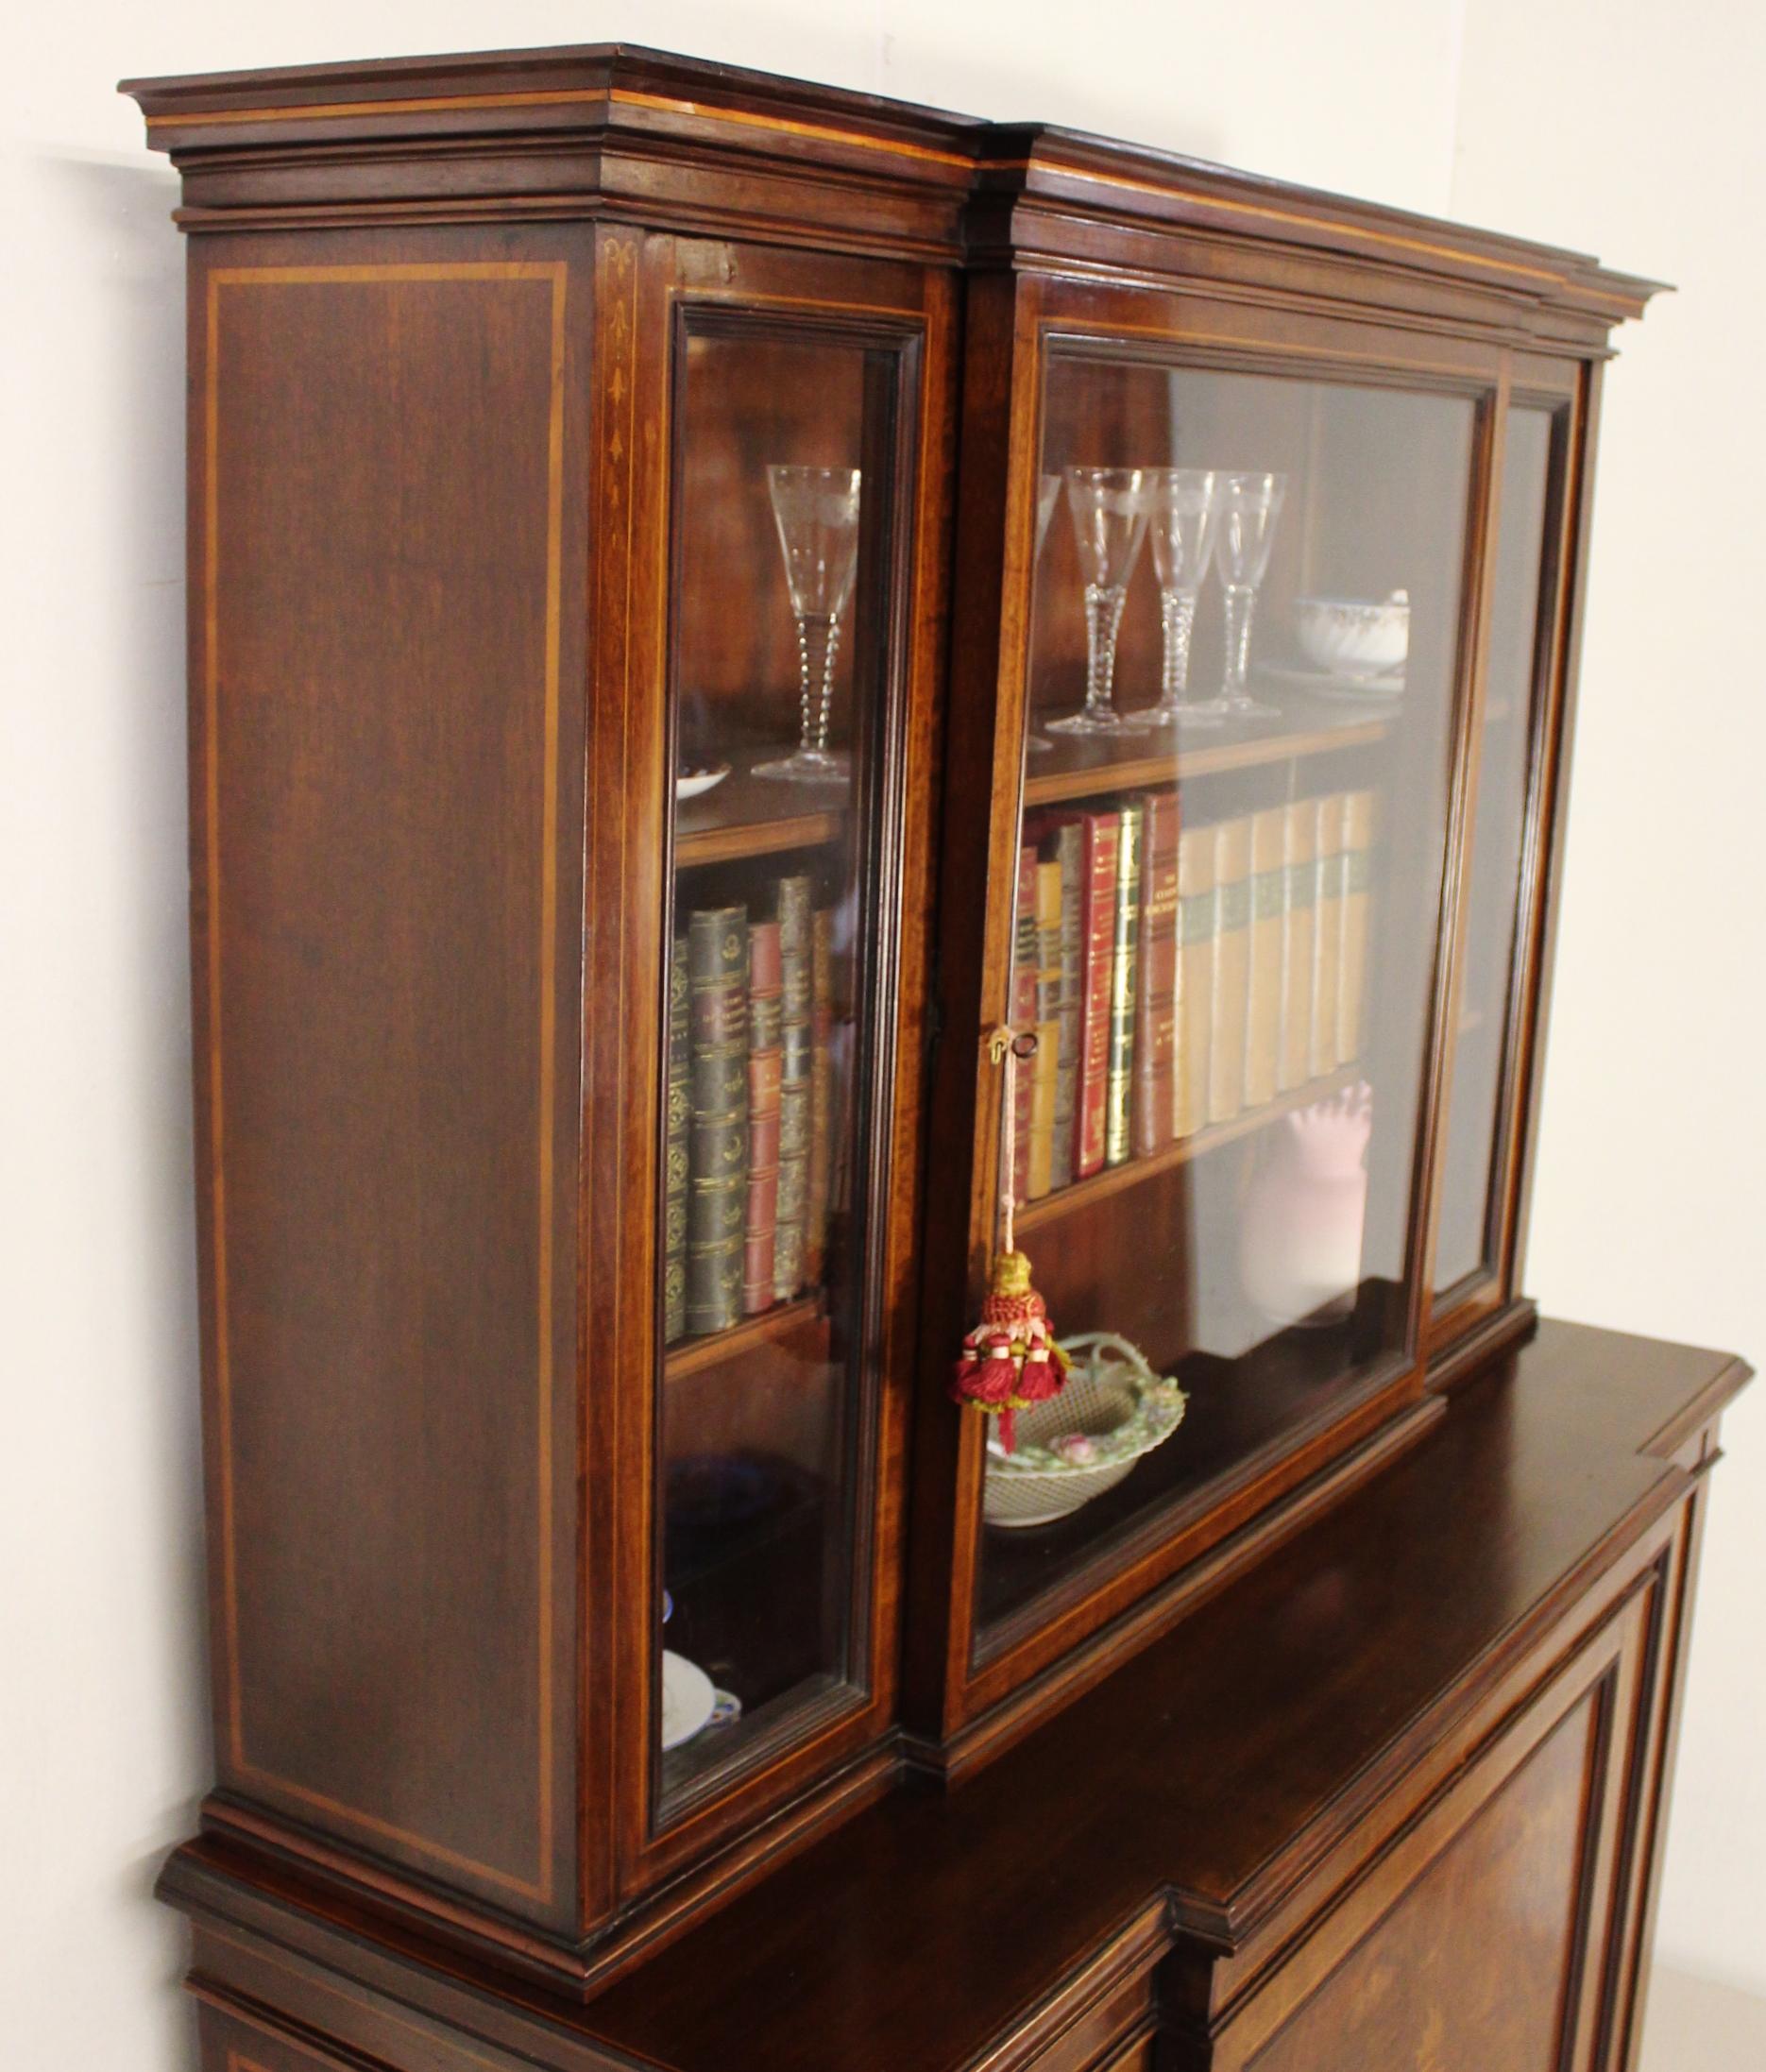 English Edwardian Period Inlaid Mahogany Bookcase/Cabinet by Jas Shoolbred For Sale 15